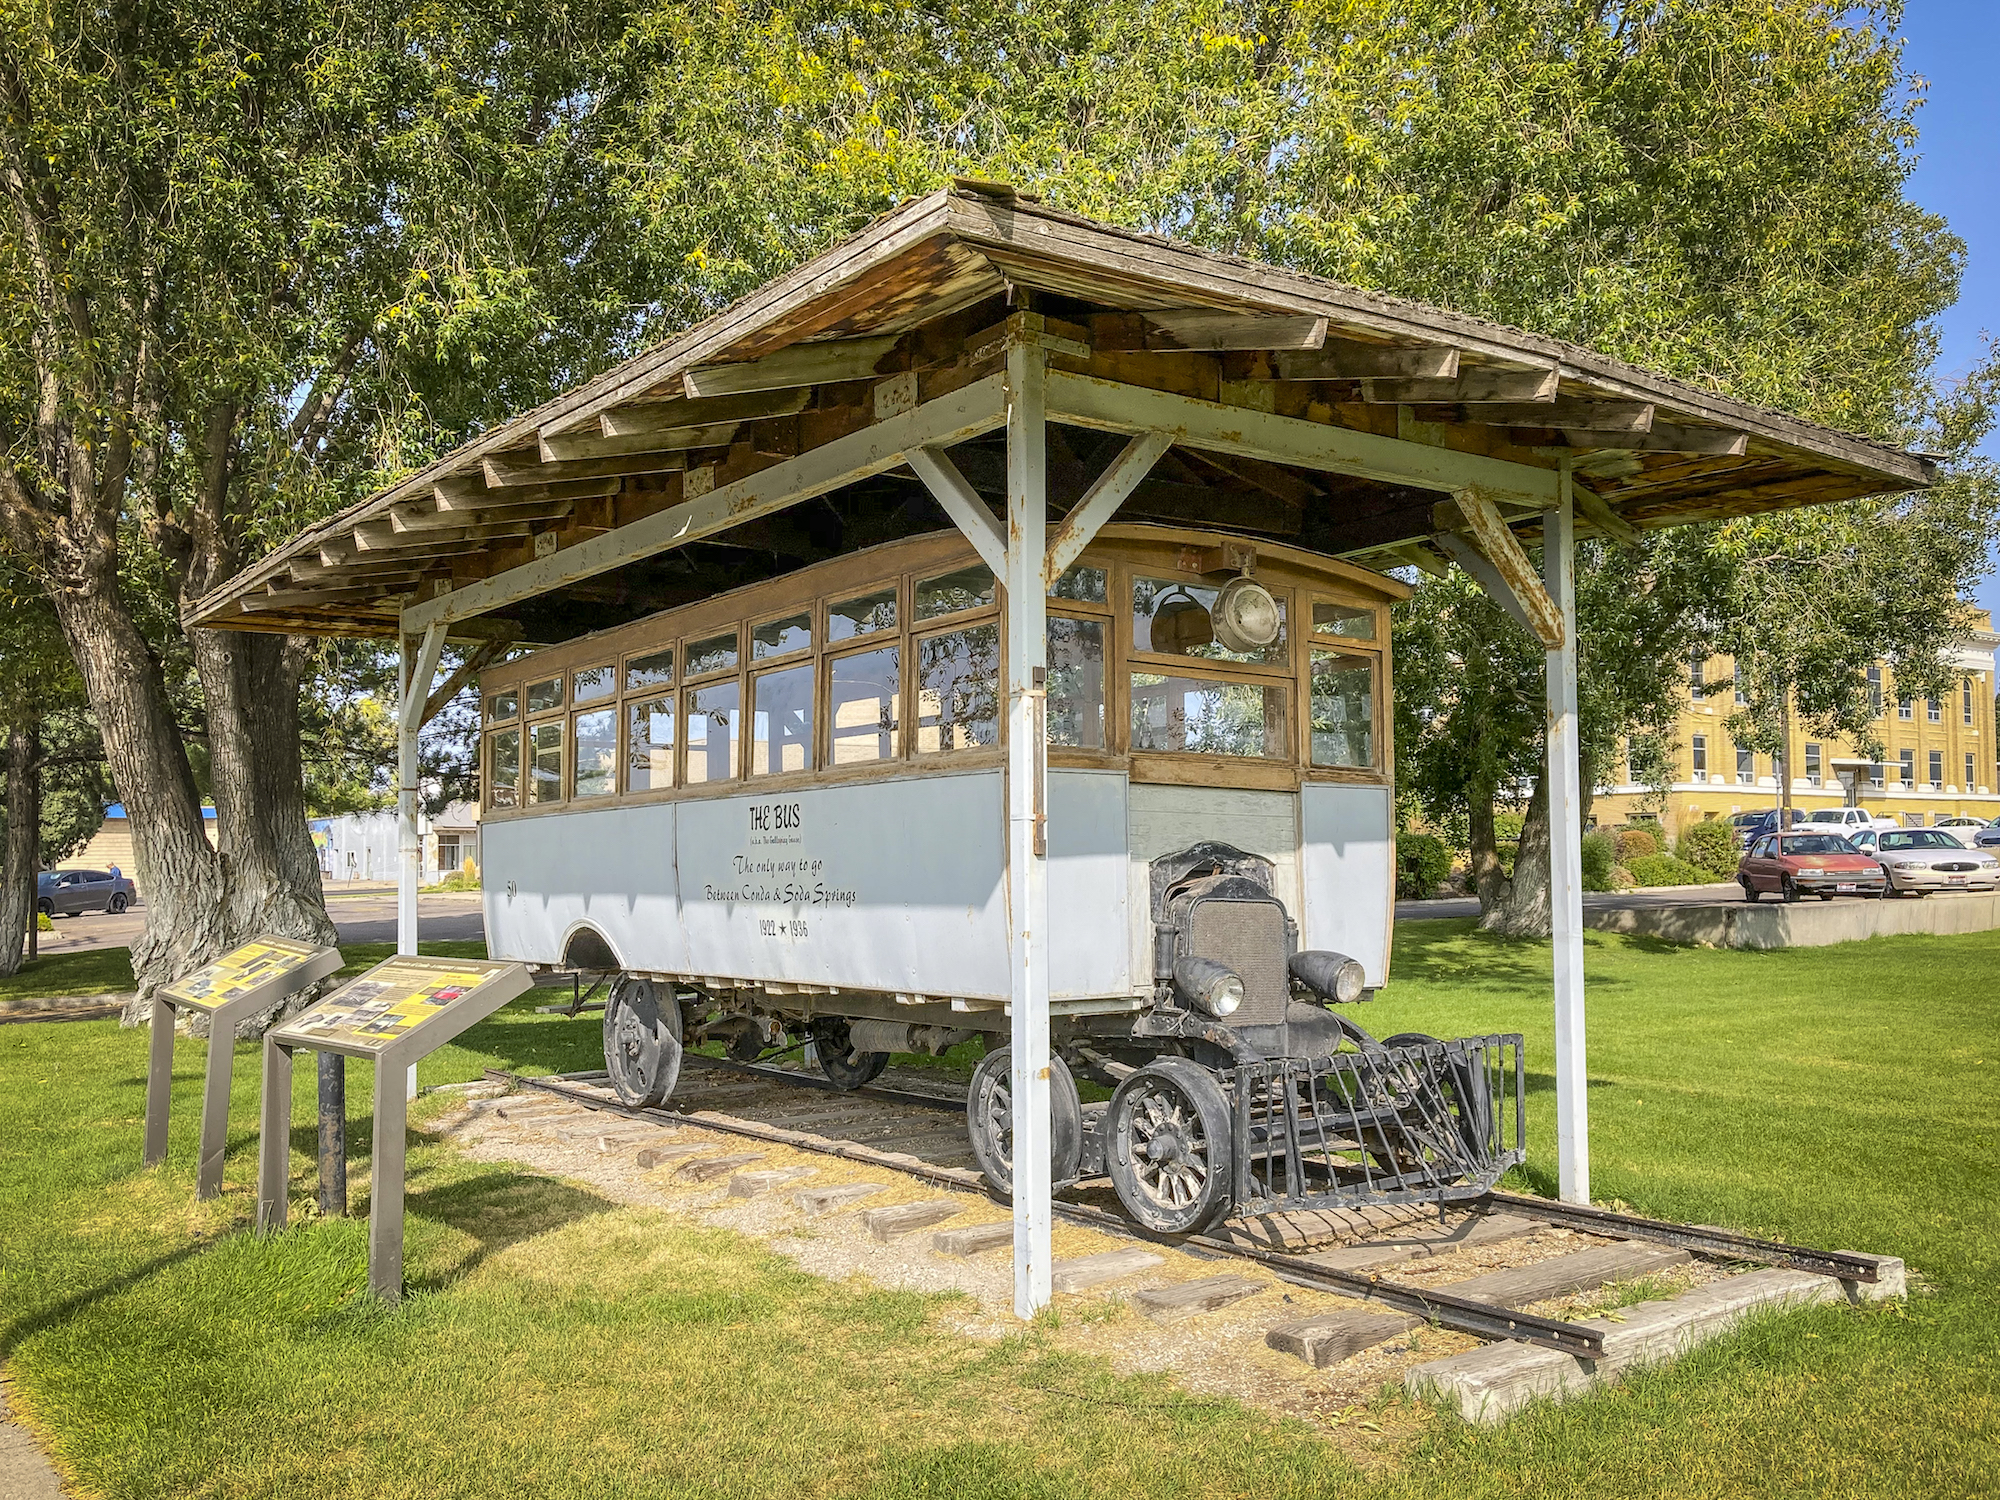 1920s railway bus on display at city park